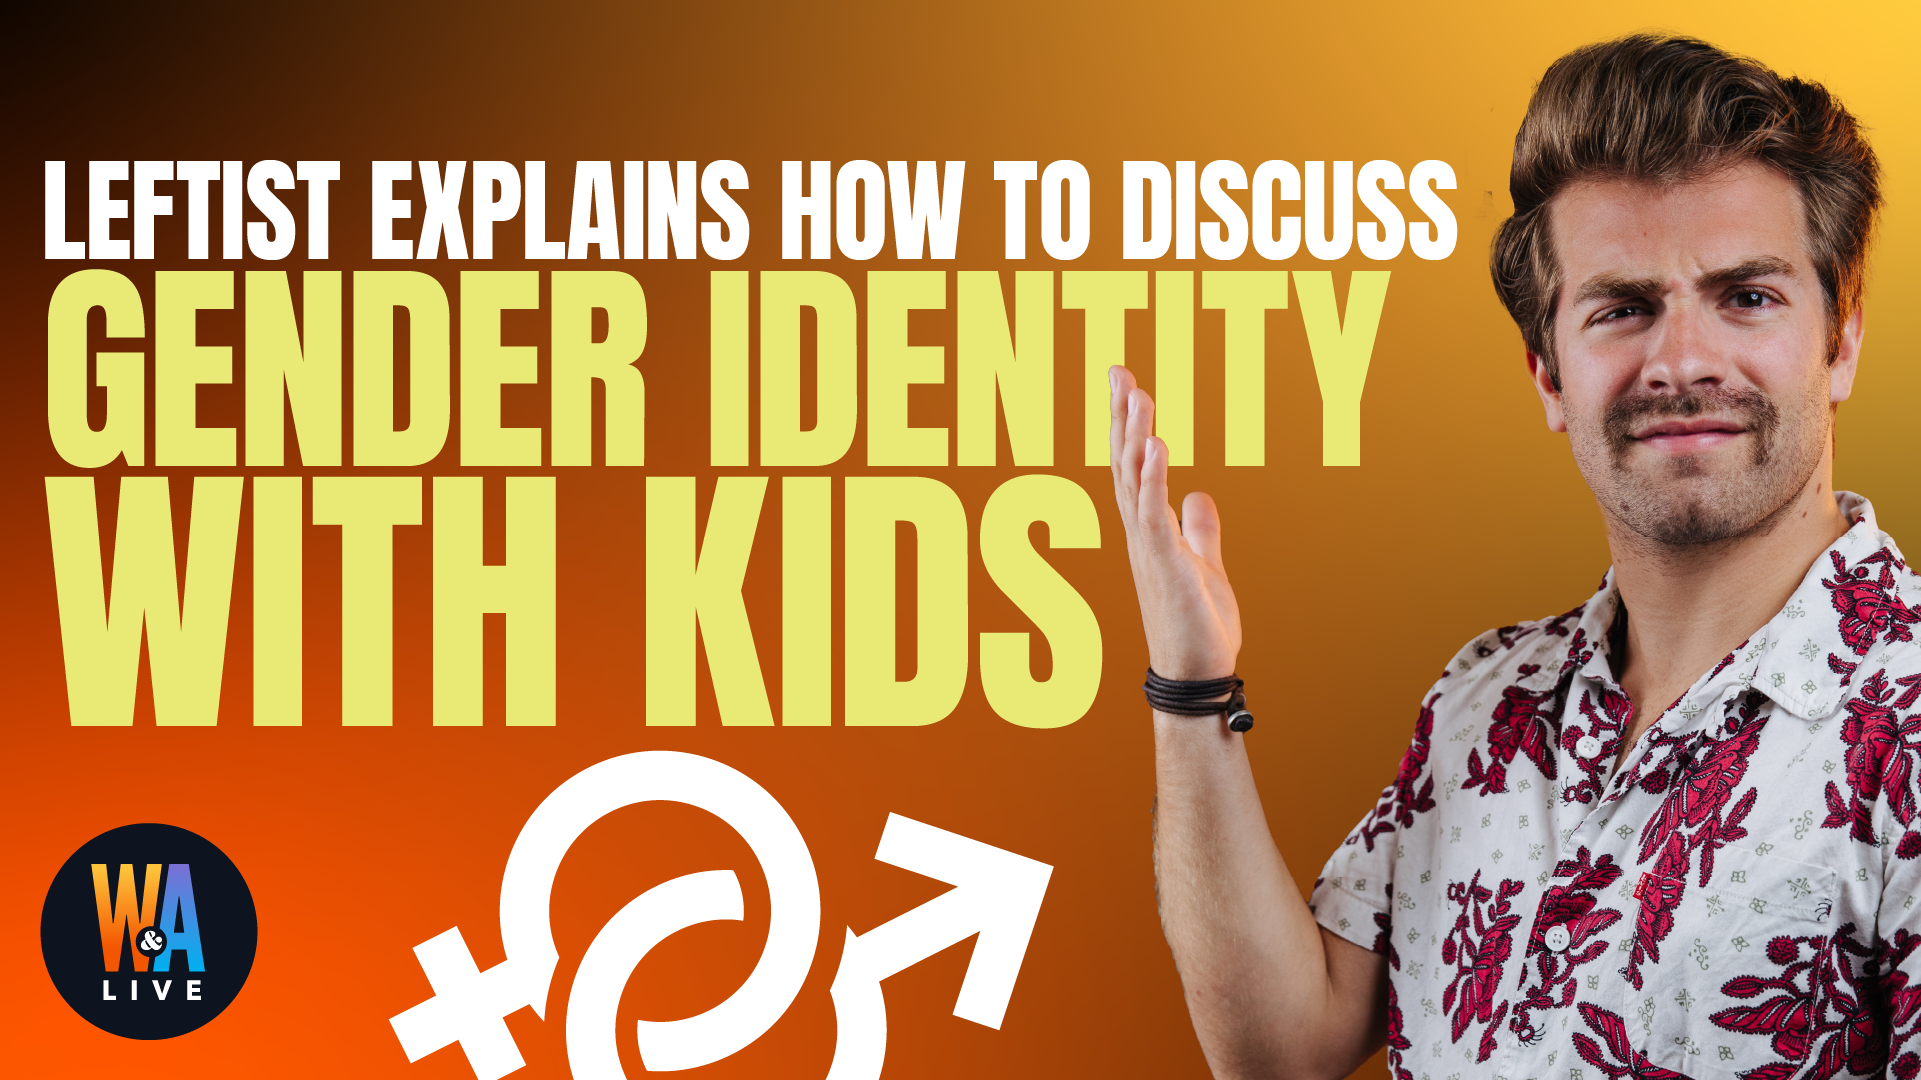 Leftist Explains How to Discuss Gender Identity with Kids